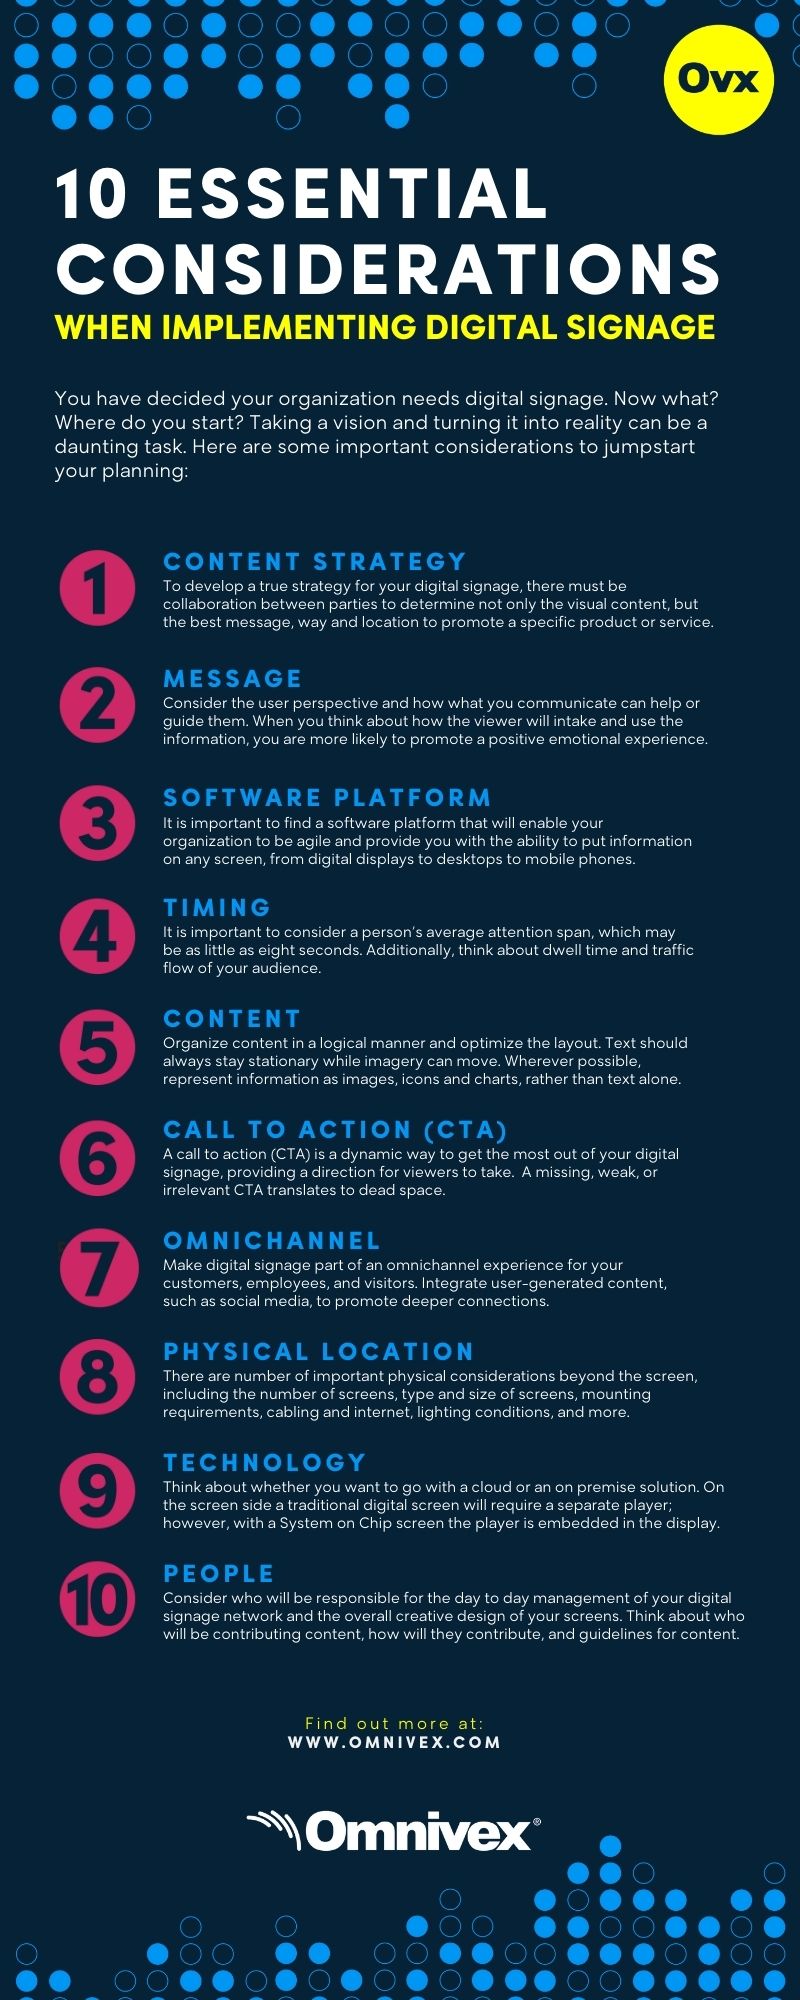 Top 10 Considerations When Implementing Digital SIgnage infographic